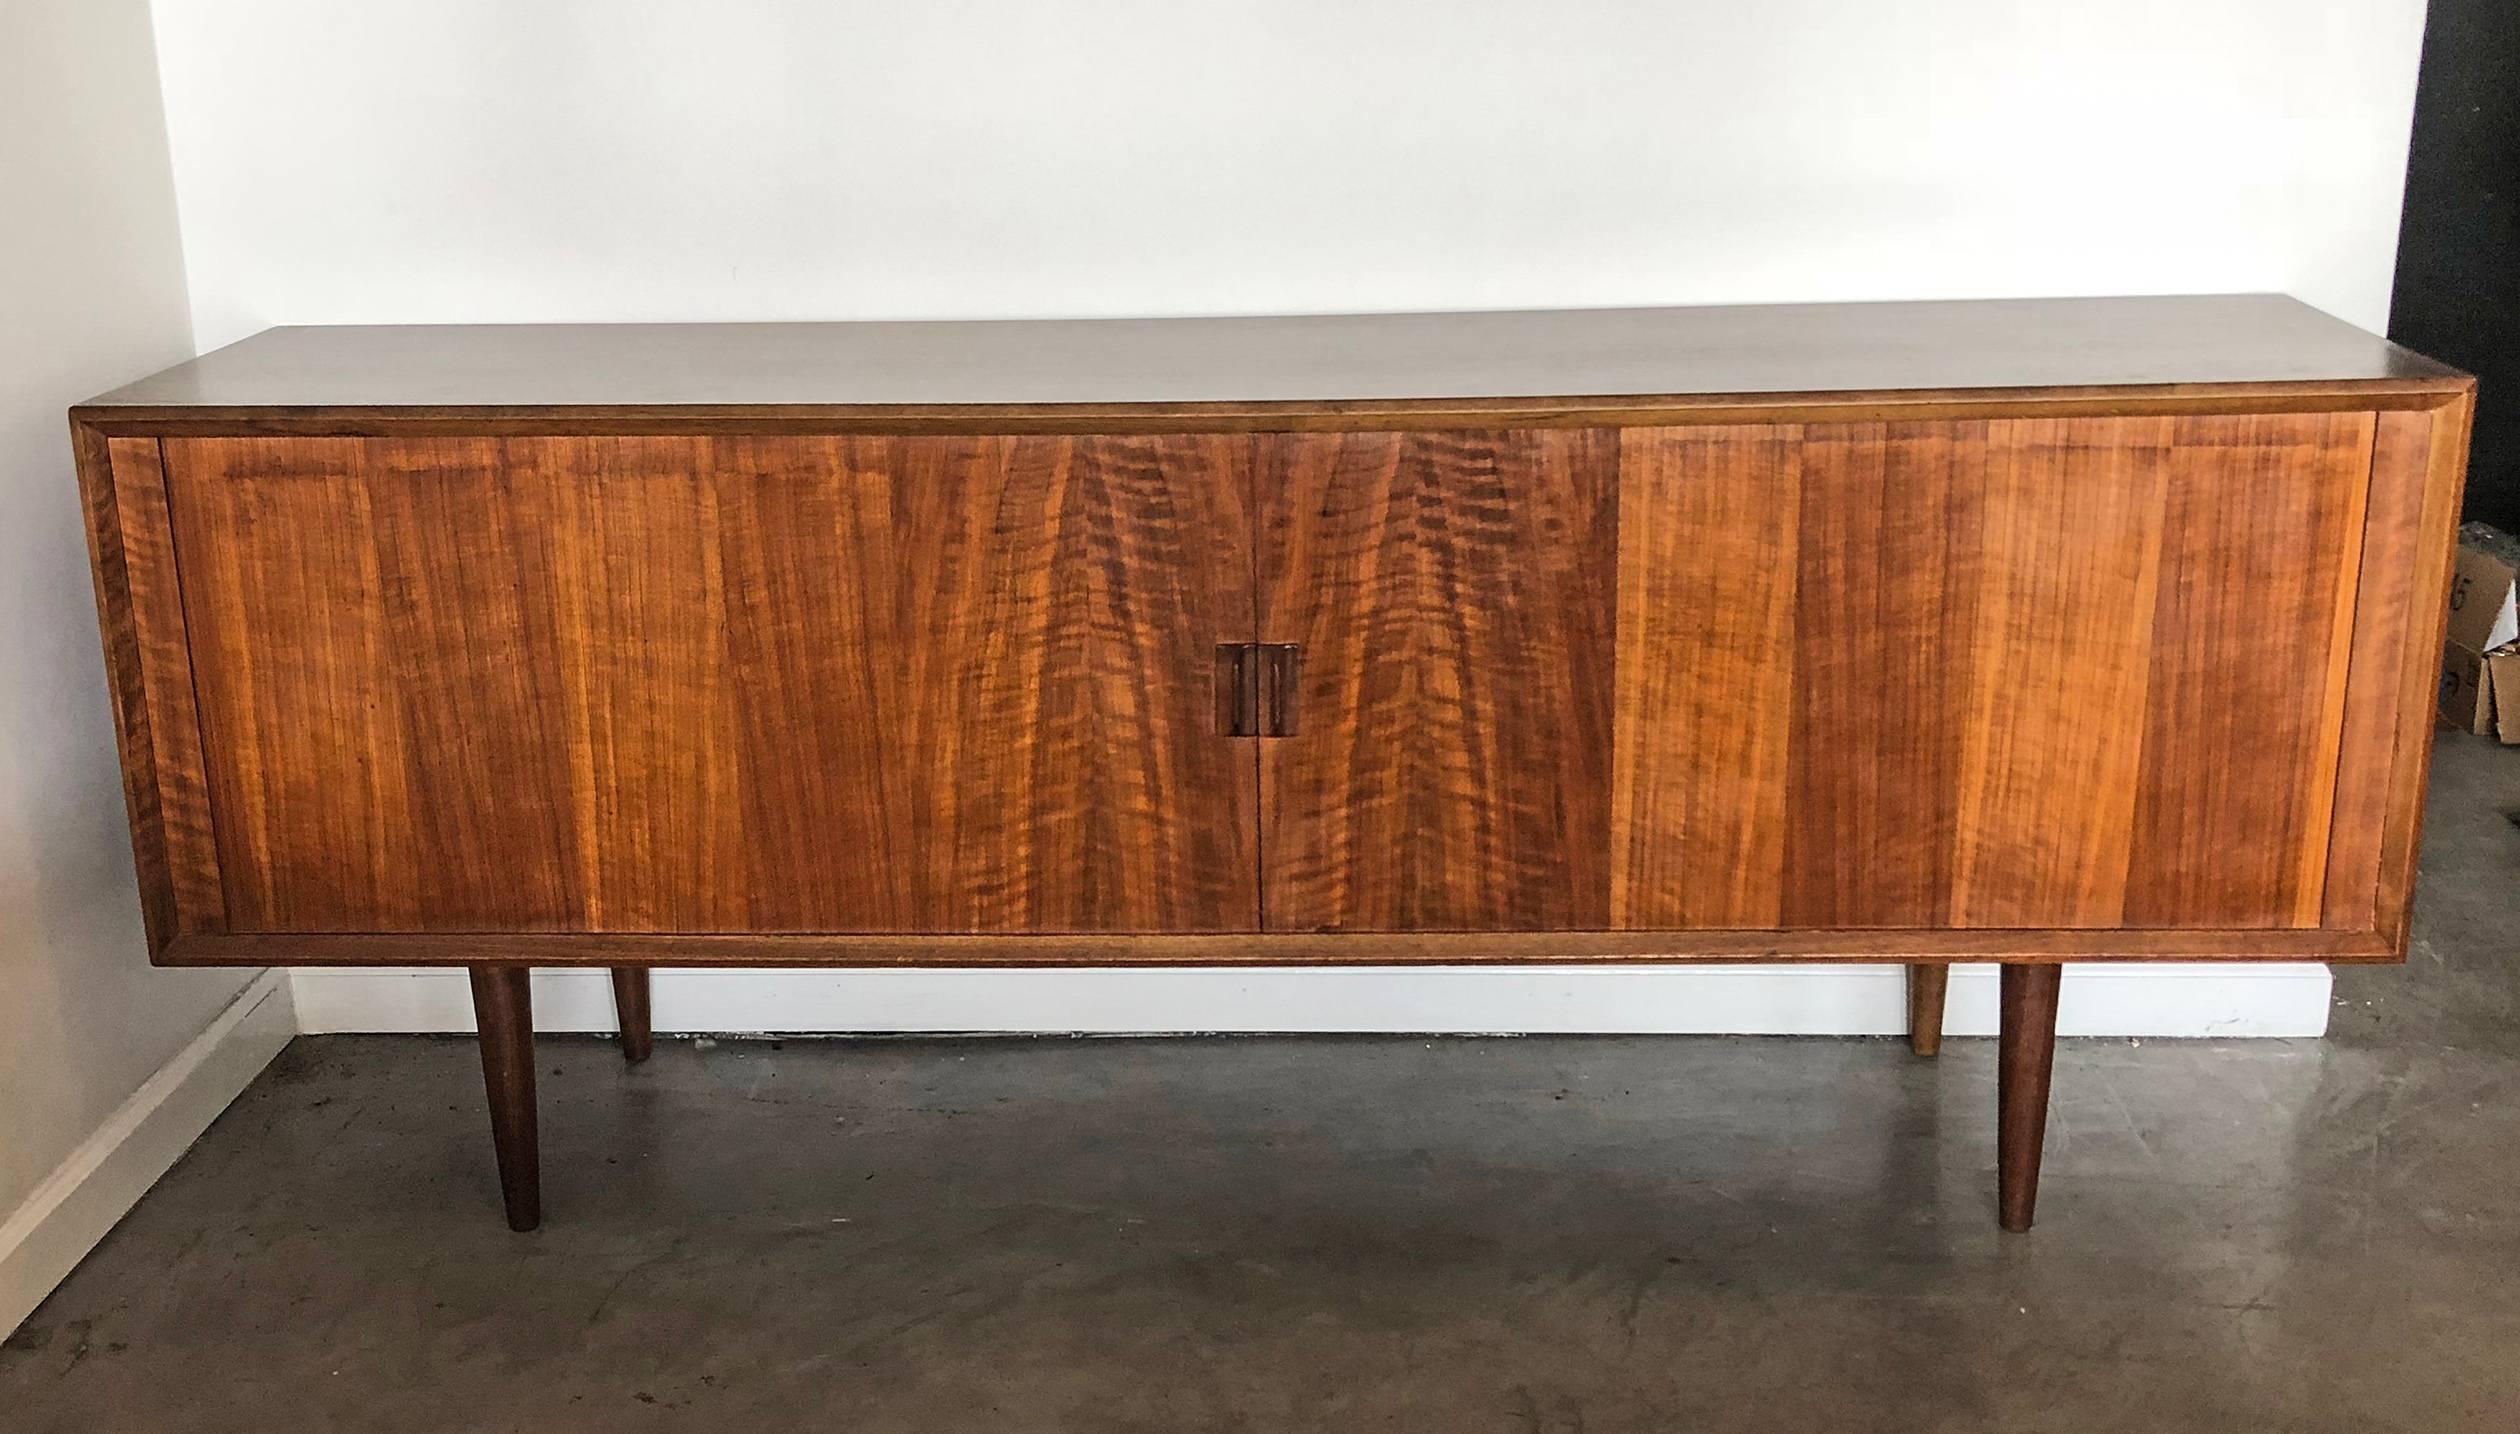 Svend Larsen for Faarup Mobelfabrik Danish modern teak credenza. This super long credenza is just as breathtakingly beautiful on it back as it is its front, featuring a fully finished back so it can be floated within a room.

At 79.75